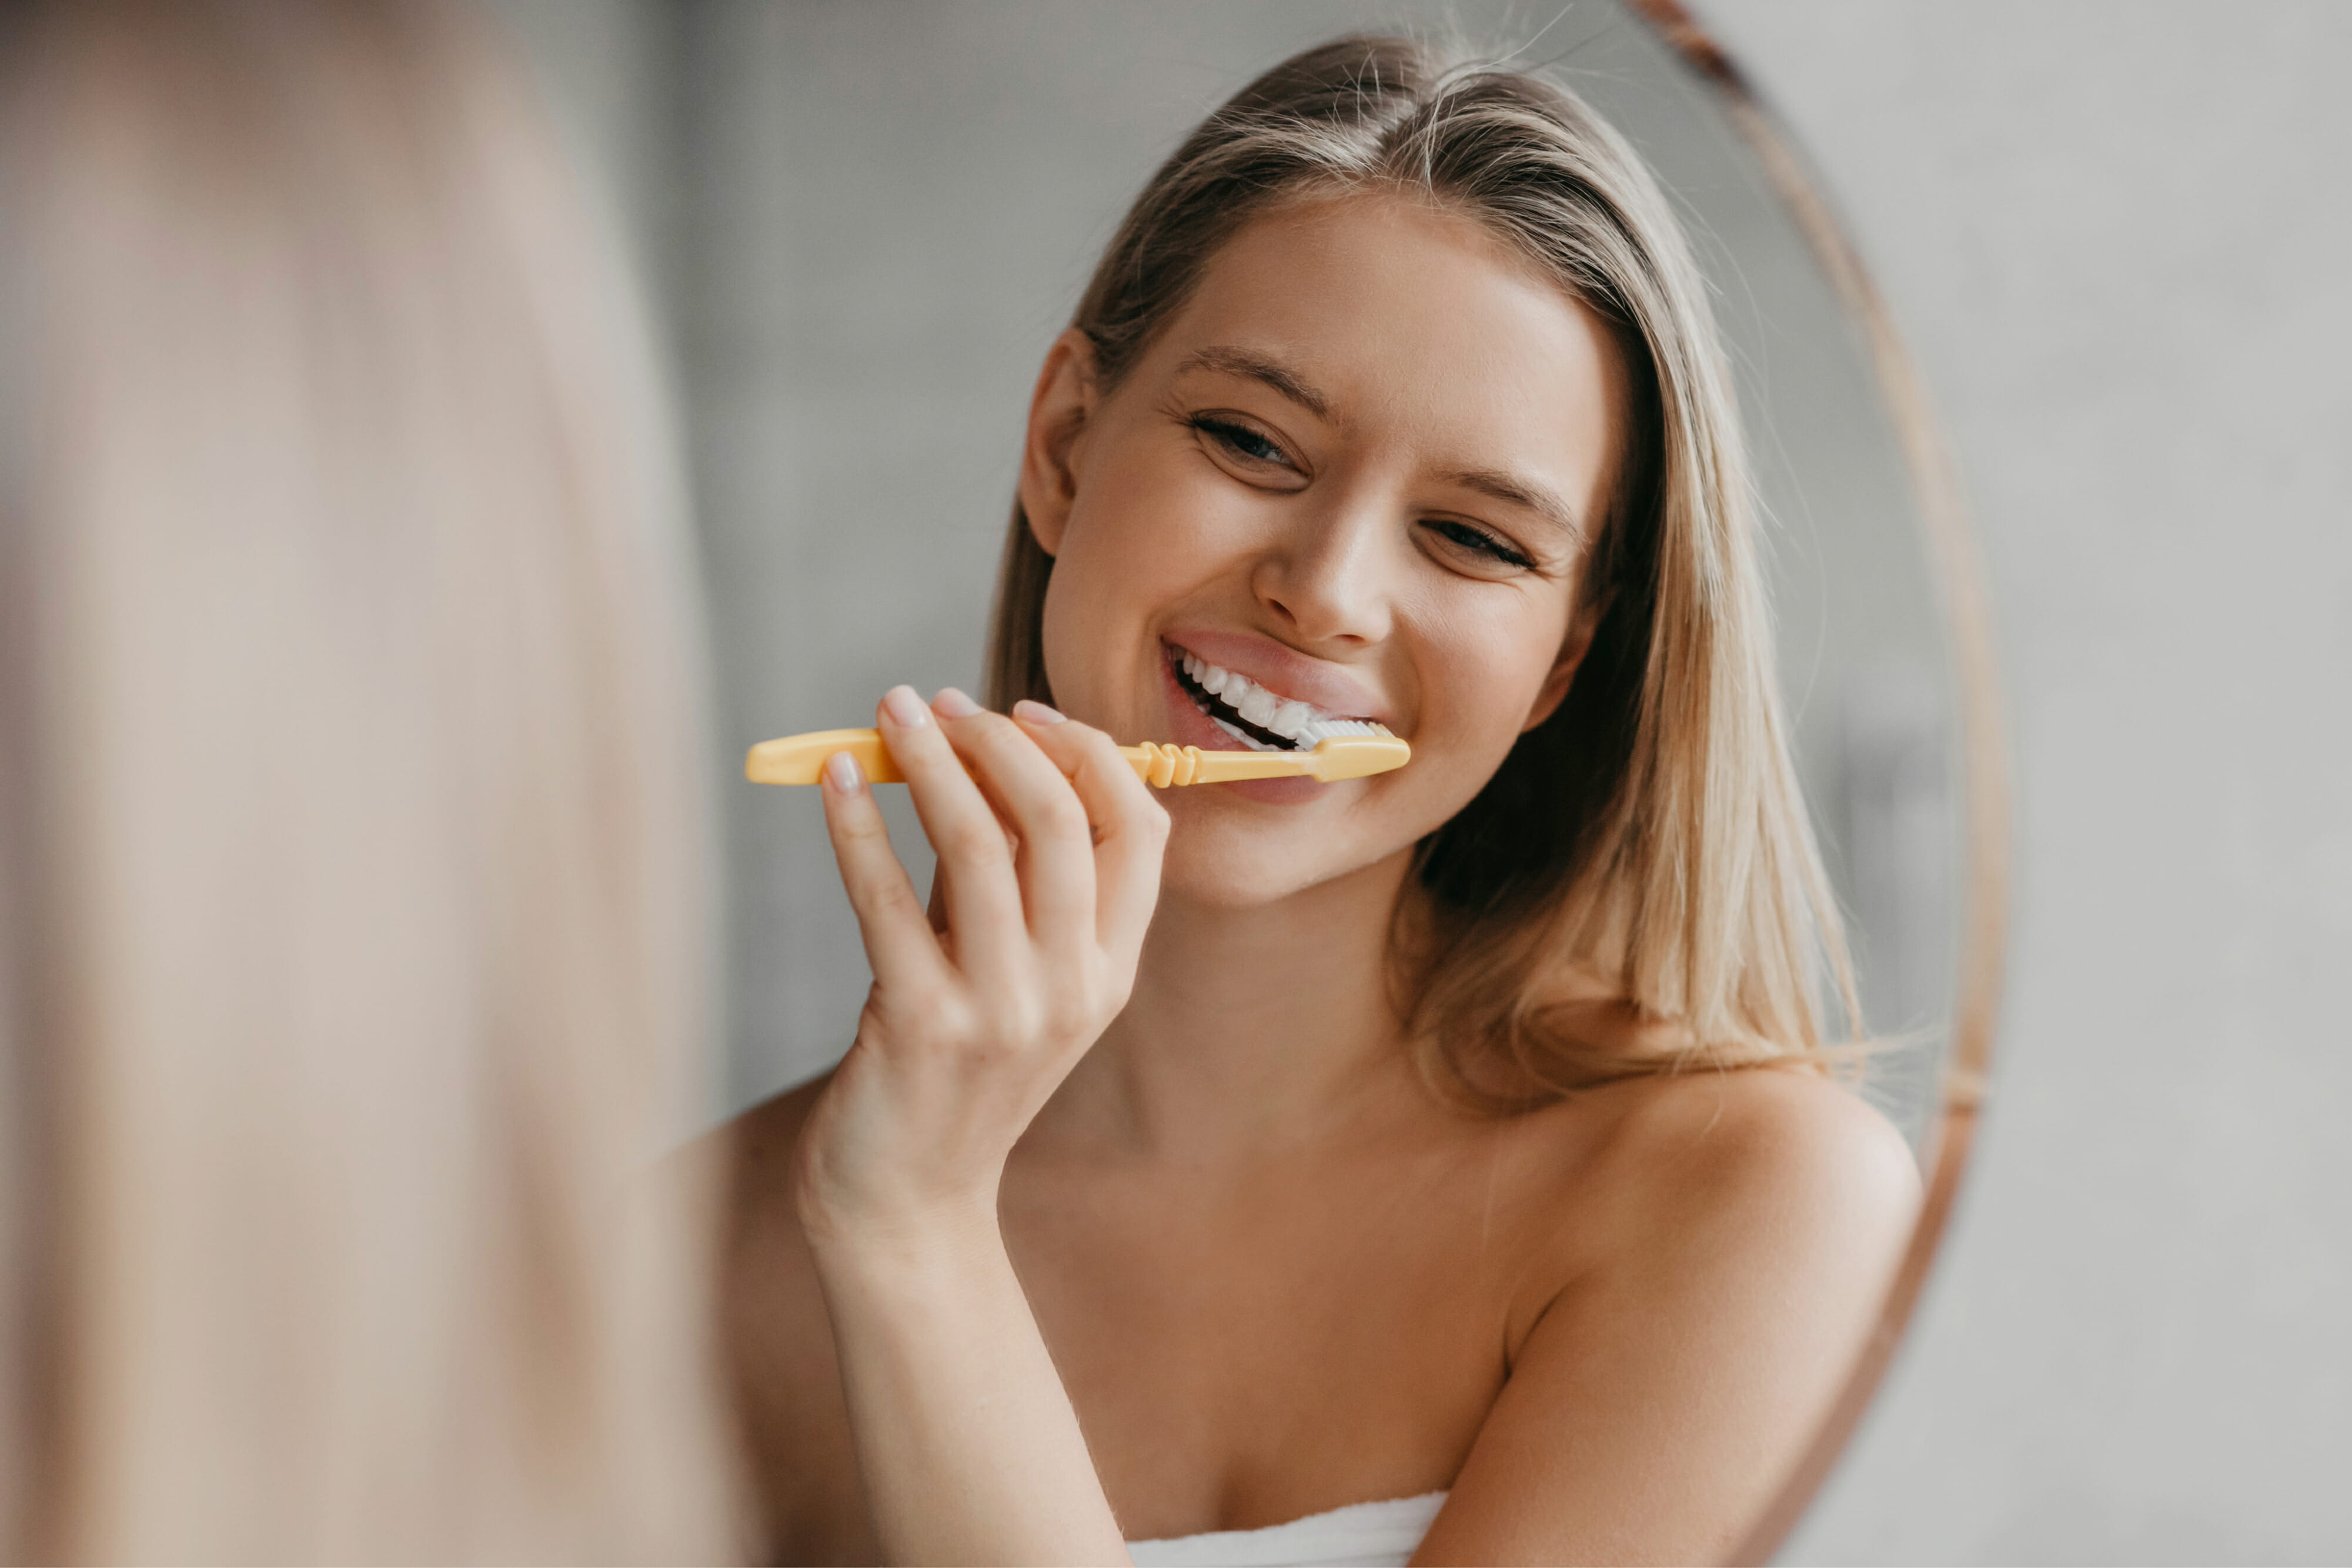 Young woman brushing teeth with toothbrush and looking in mirror in bathroom